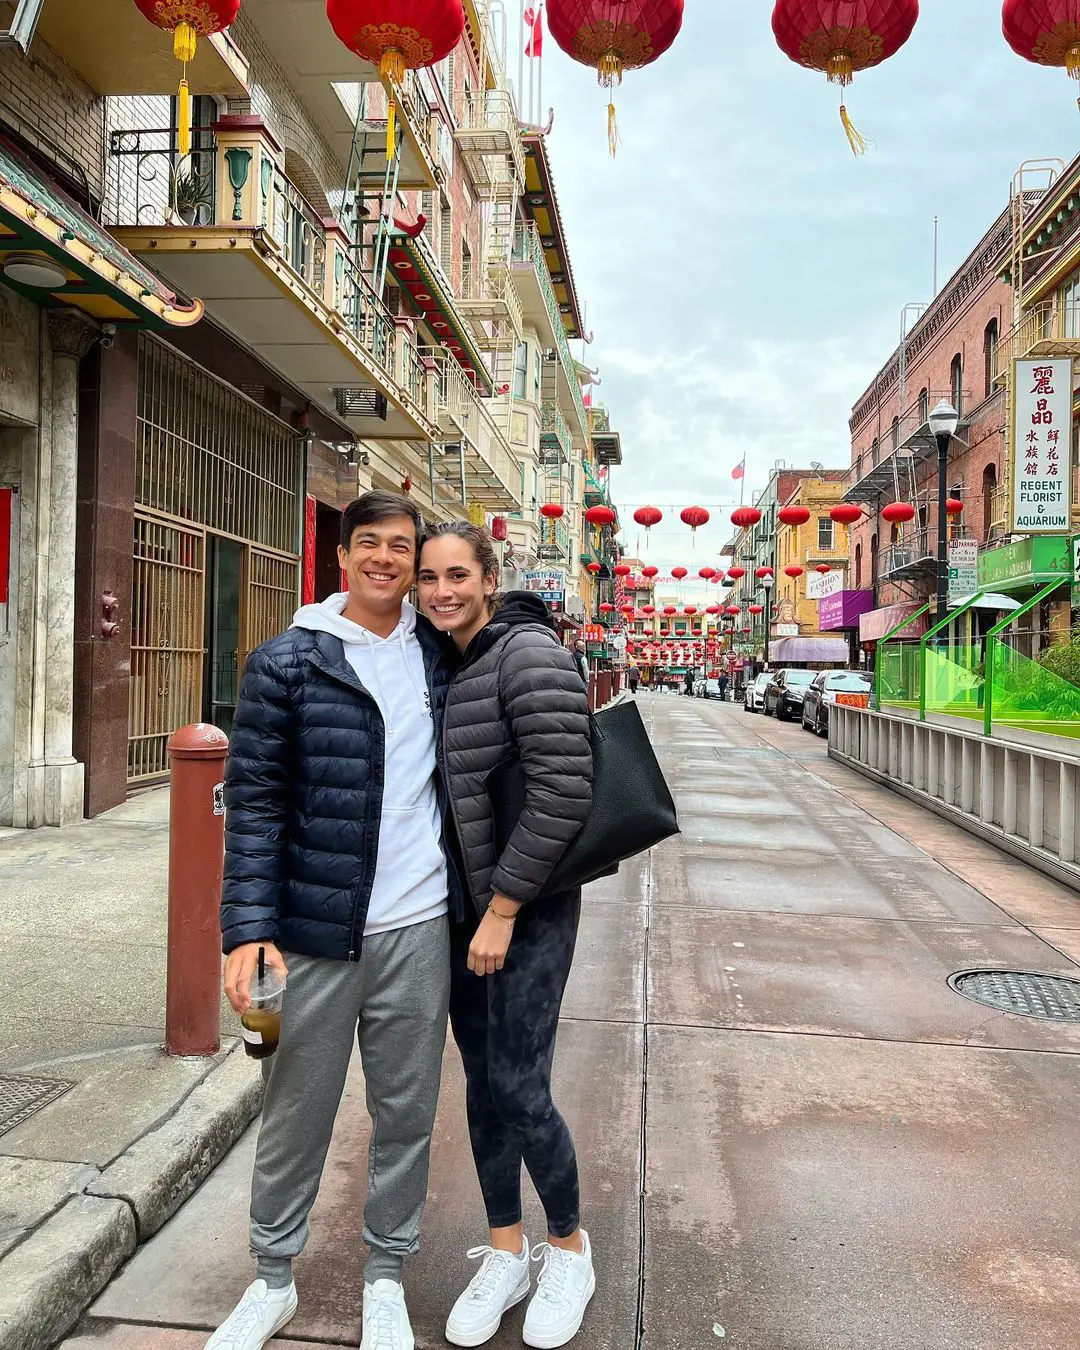 Mackenzie and Maria strolling on the streets of Chinatown, San Francisco in July 2022